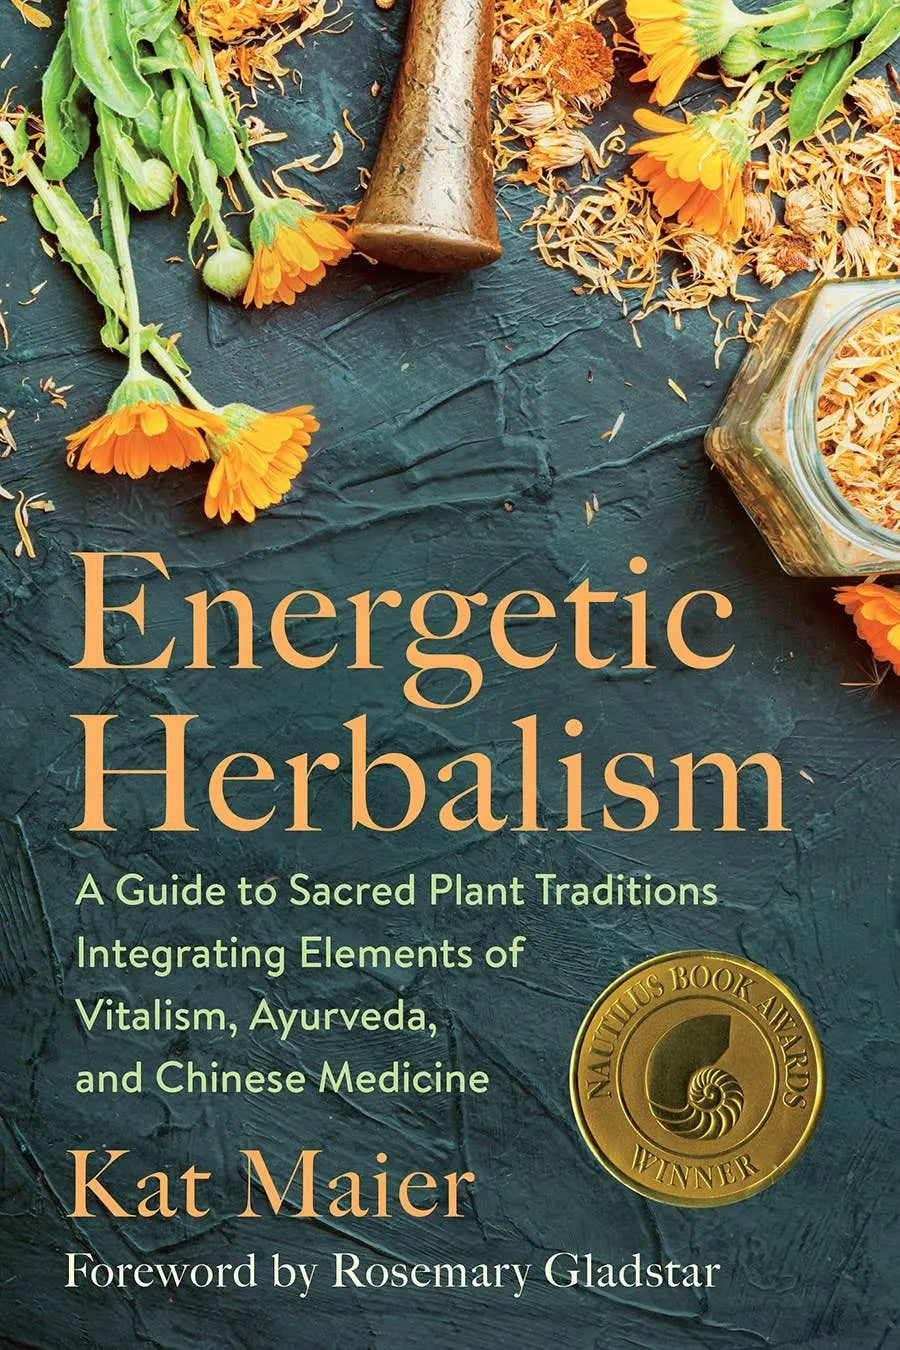 Energetic Herbalism: A Guide to Sacred Plant Traditions Microcosm Publishing & Distribution